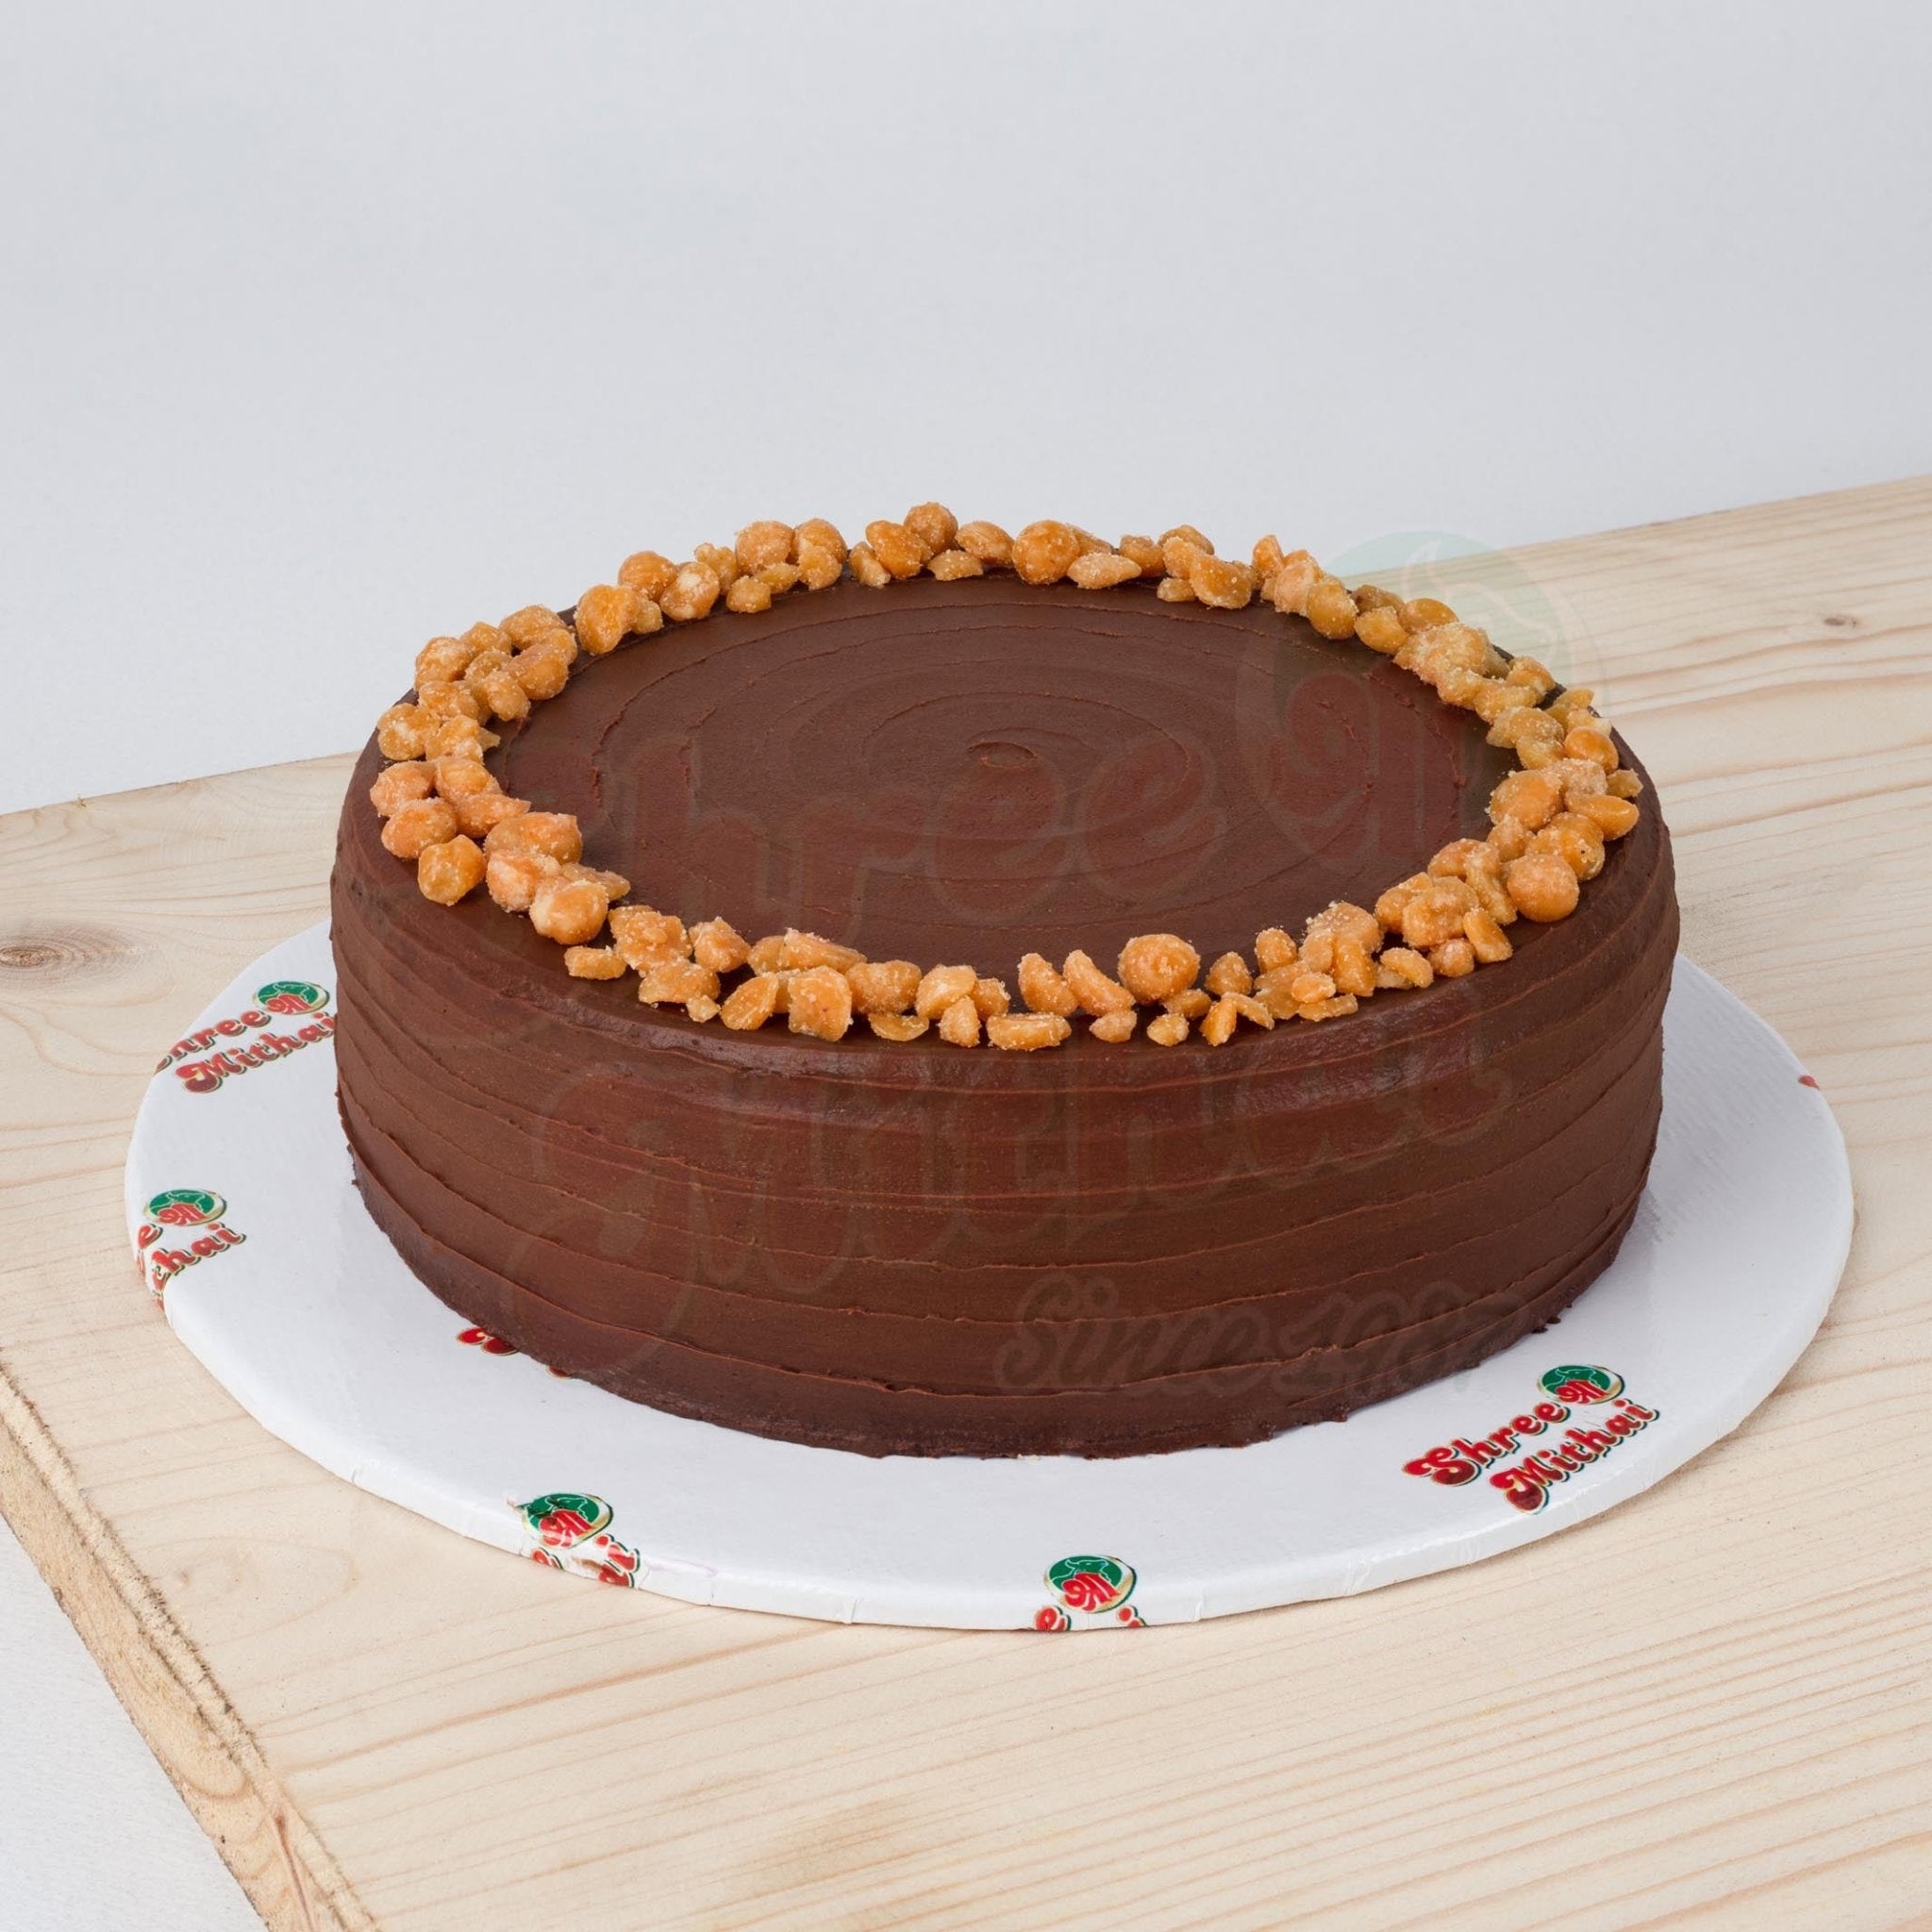 Chocolate Chips Cake | Choco Chips Cake | Order Now for Free Delivery in 2  hrs